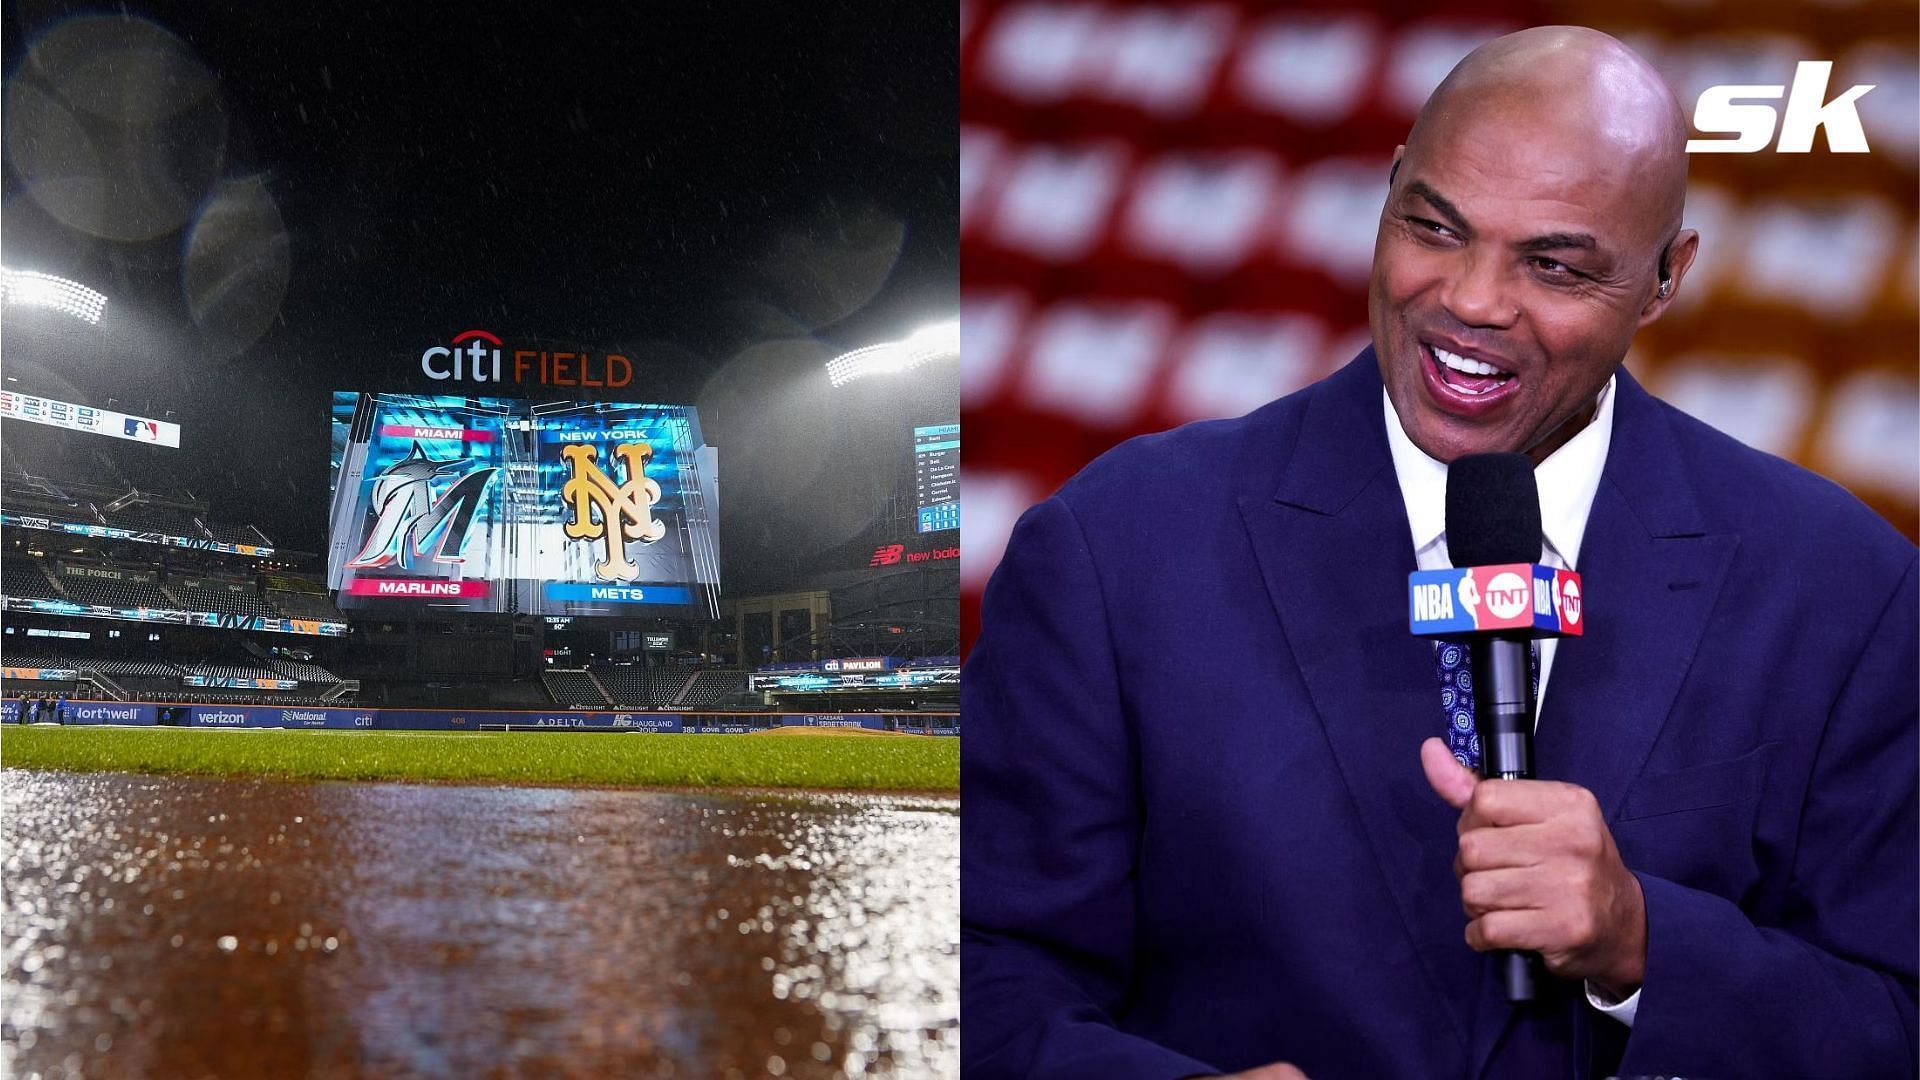 NBA legend Charles Barkley said the suspension of the Marlins and Mets game cost him his bet he placed